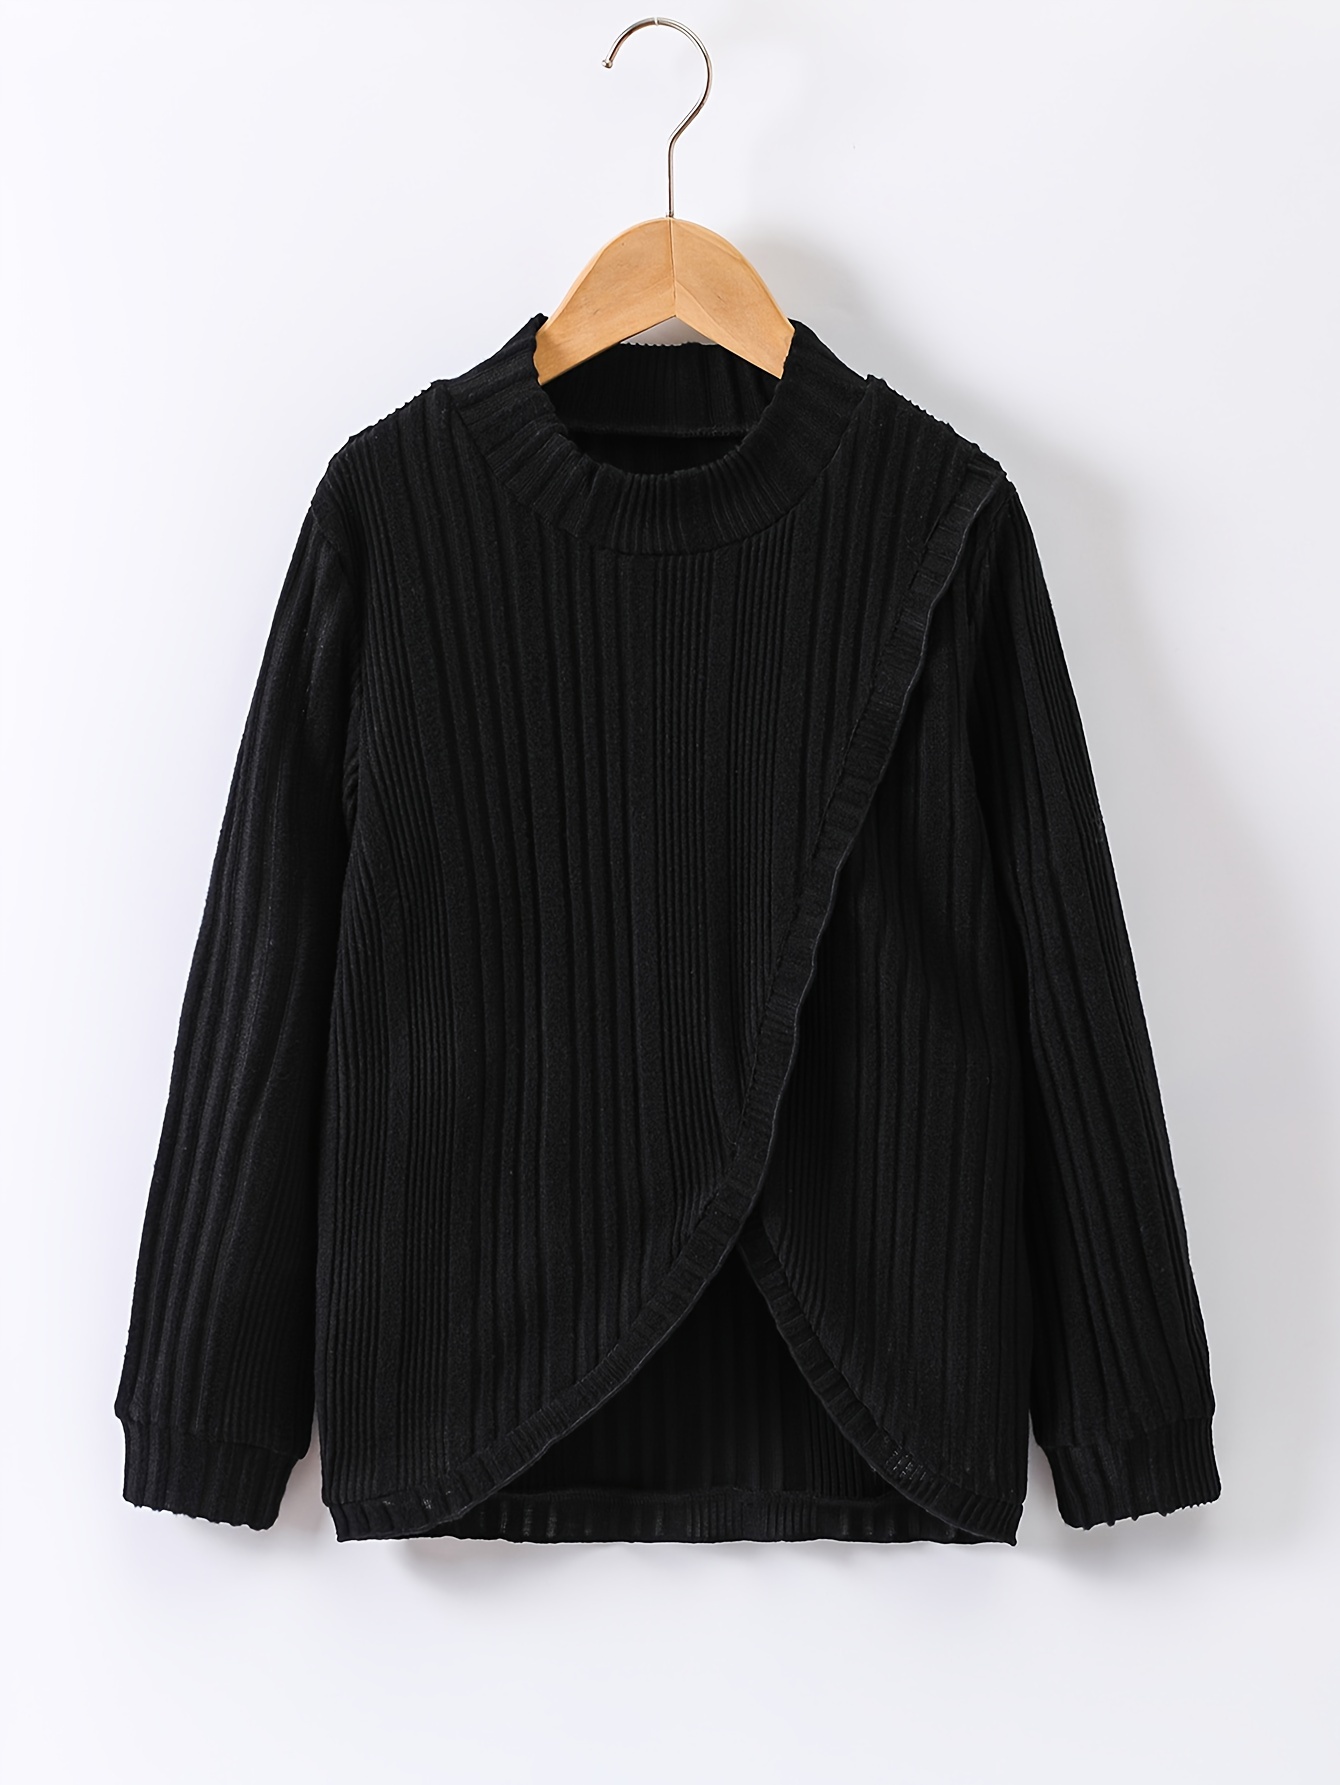 New Arrival Stylish Casual Black Sweater For Womens, Girls Winter Collection  Under 499, School Wear Sweater